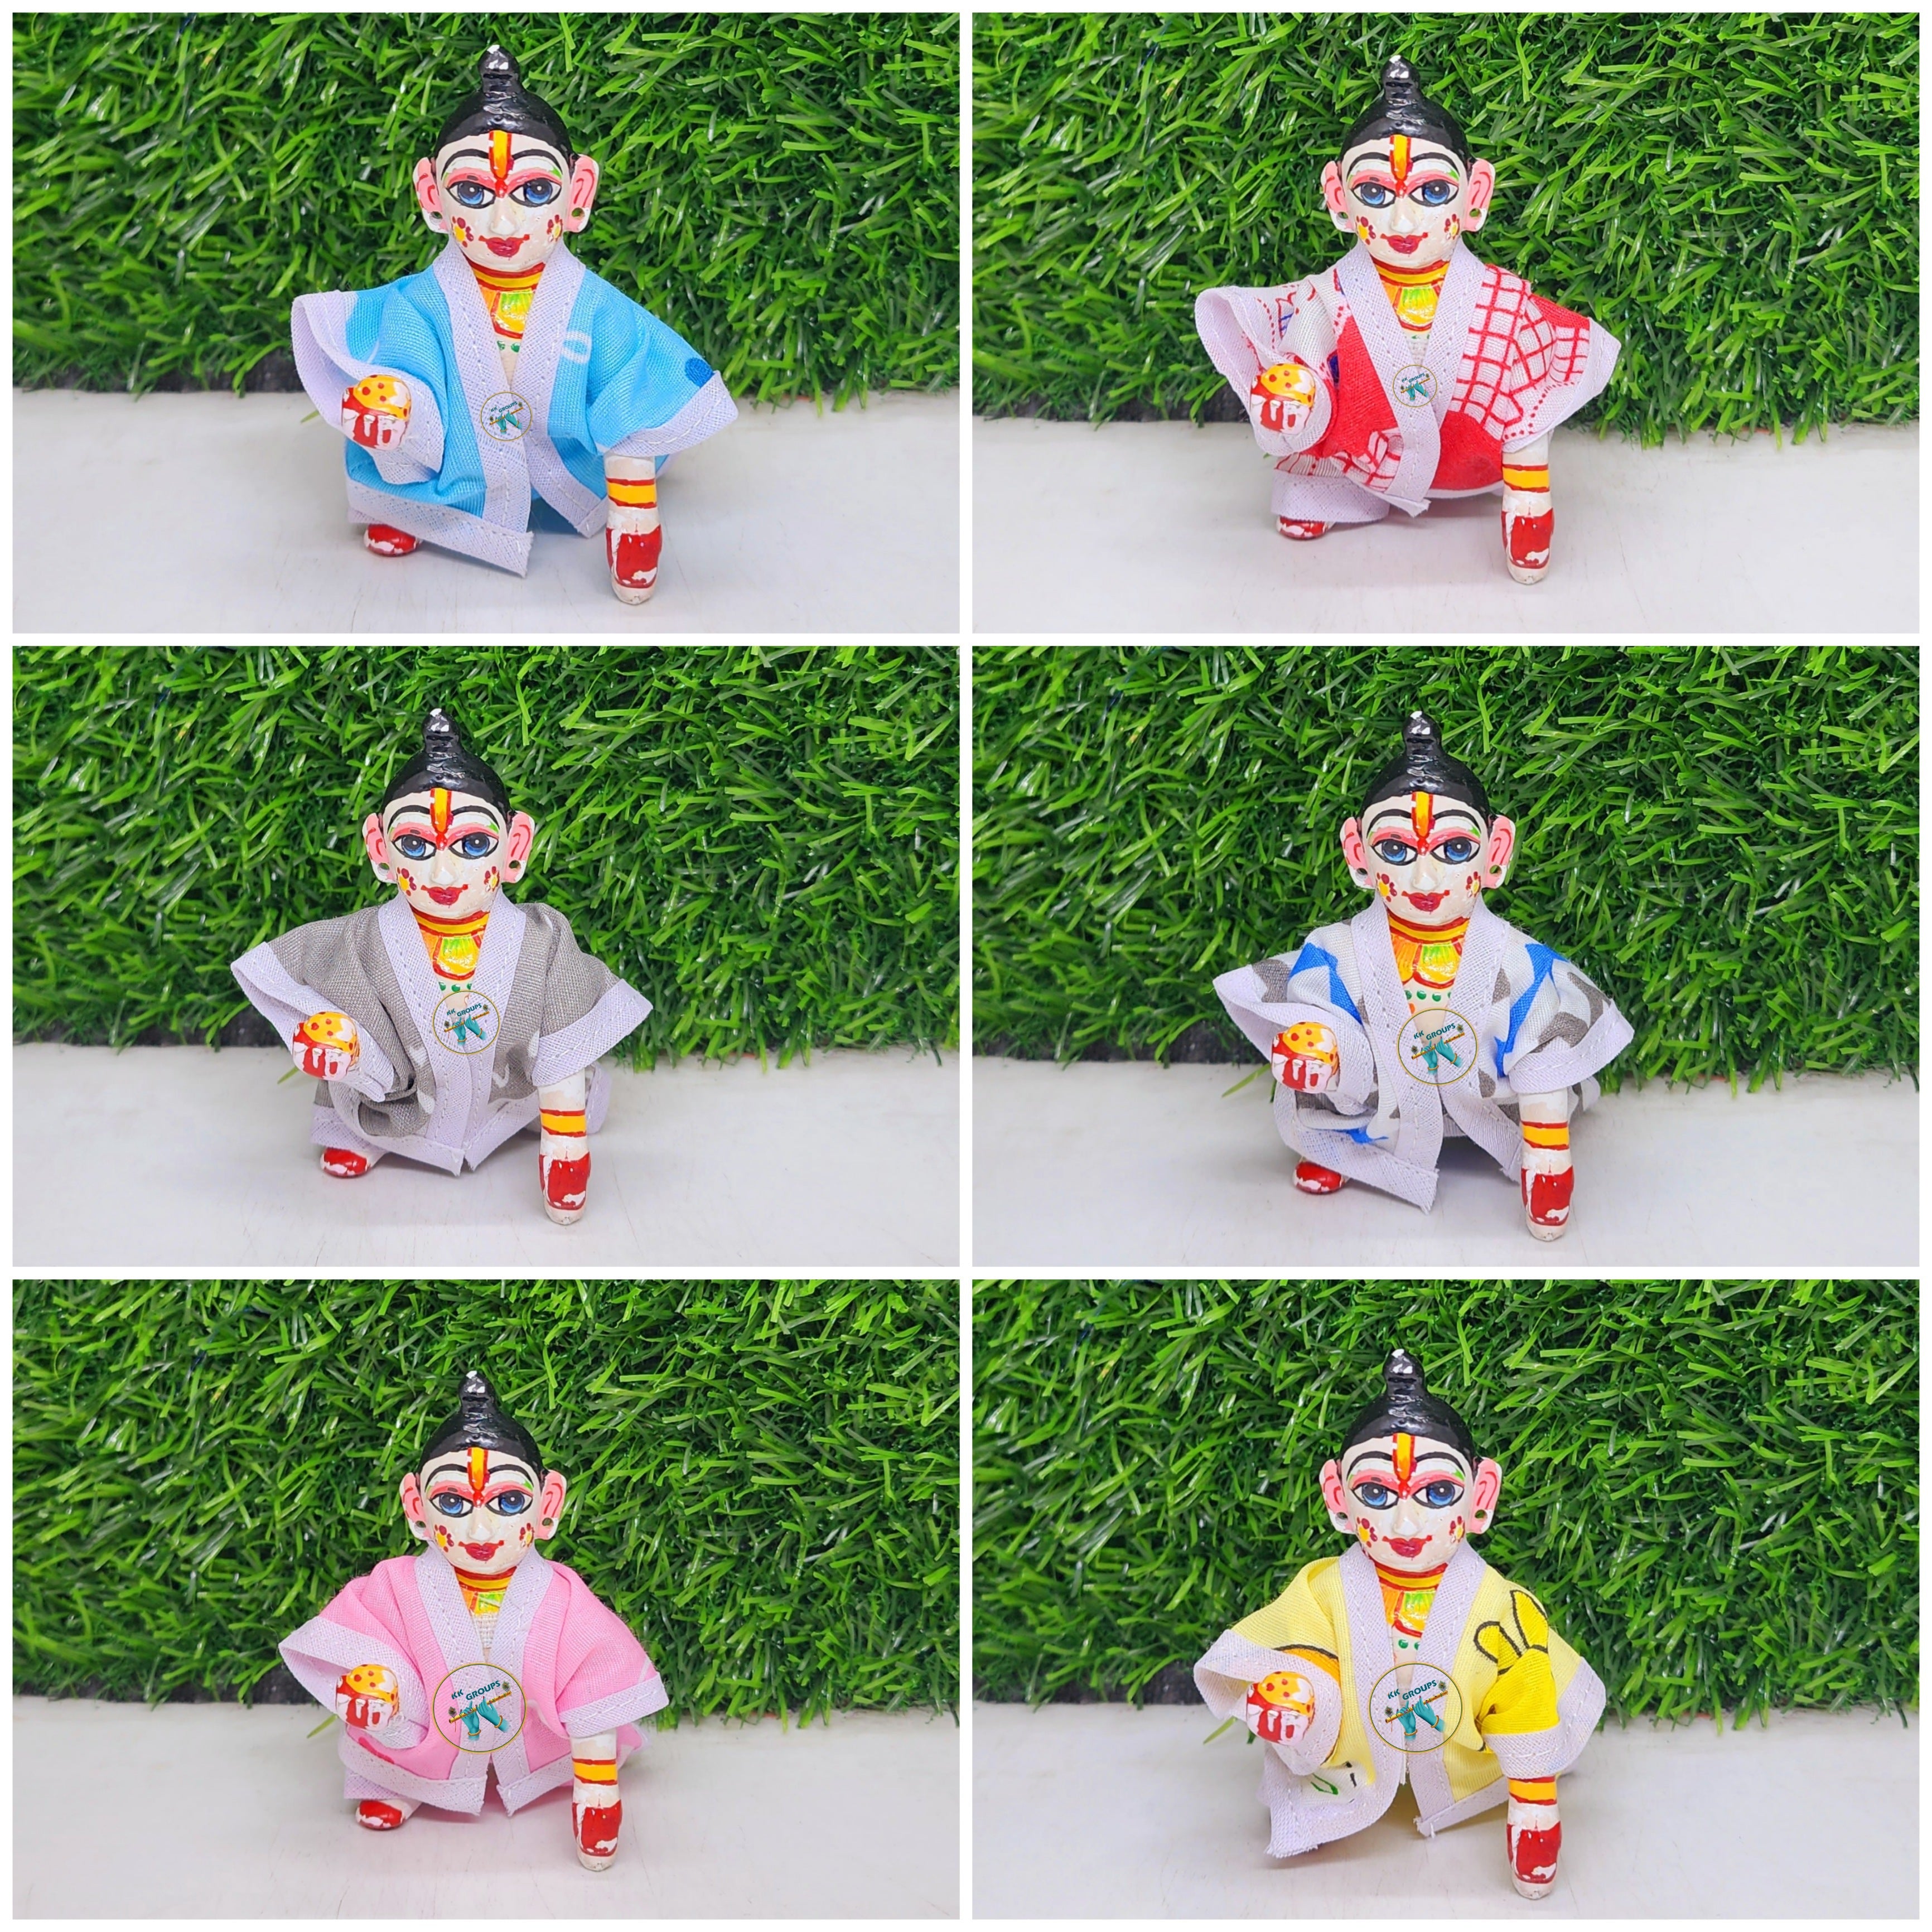 Winter Special Woolen Night Suits (Pack of 12)(SIZE 6 NO. LADDU GOPAL) for  Laddu